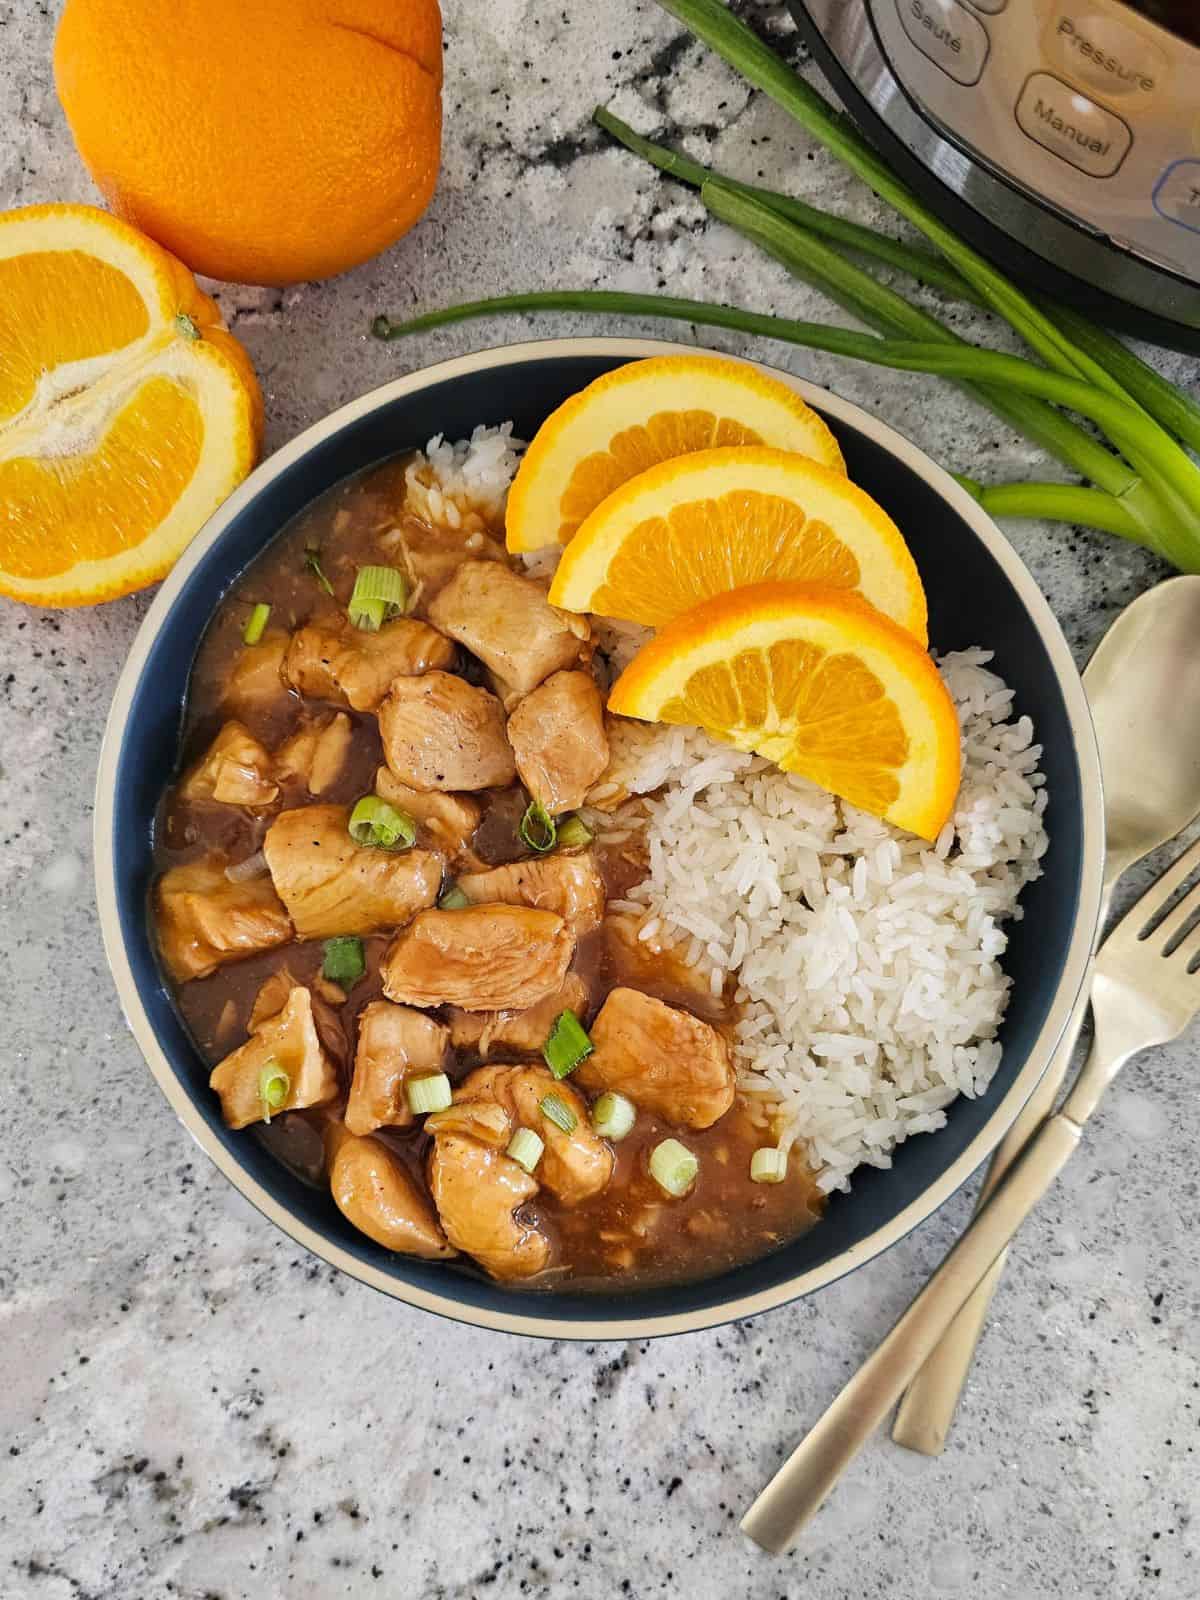 Instant Pot Orange Chicken served with rice on the side and the Instant Pot, and fresh oranges in the background.